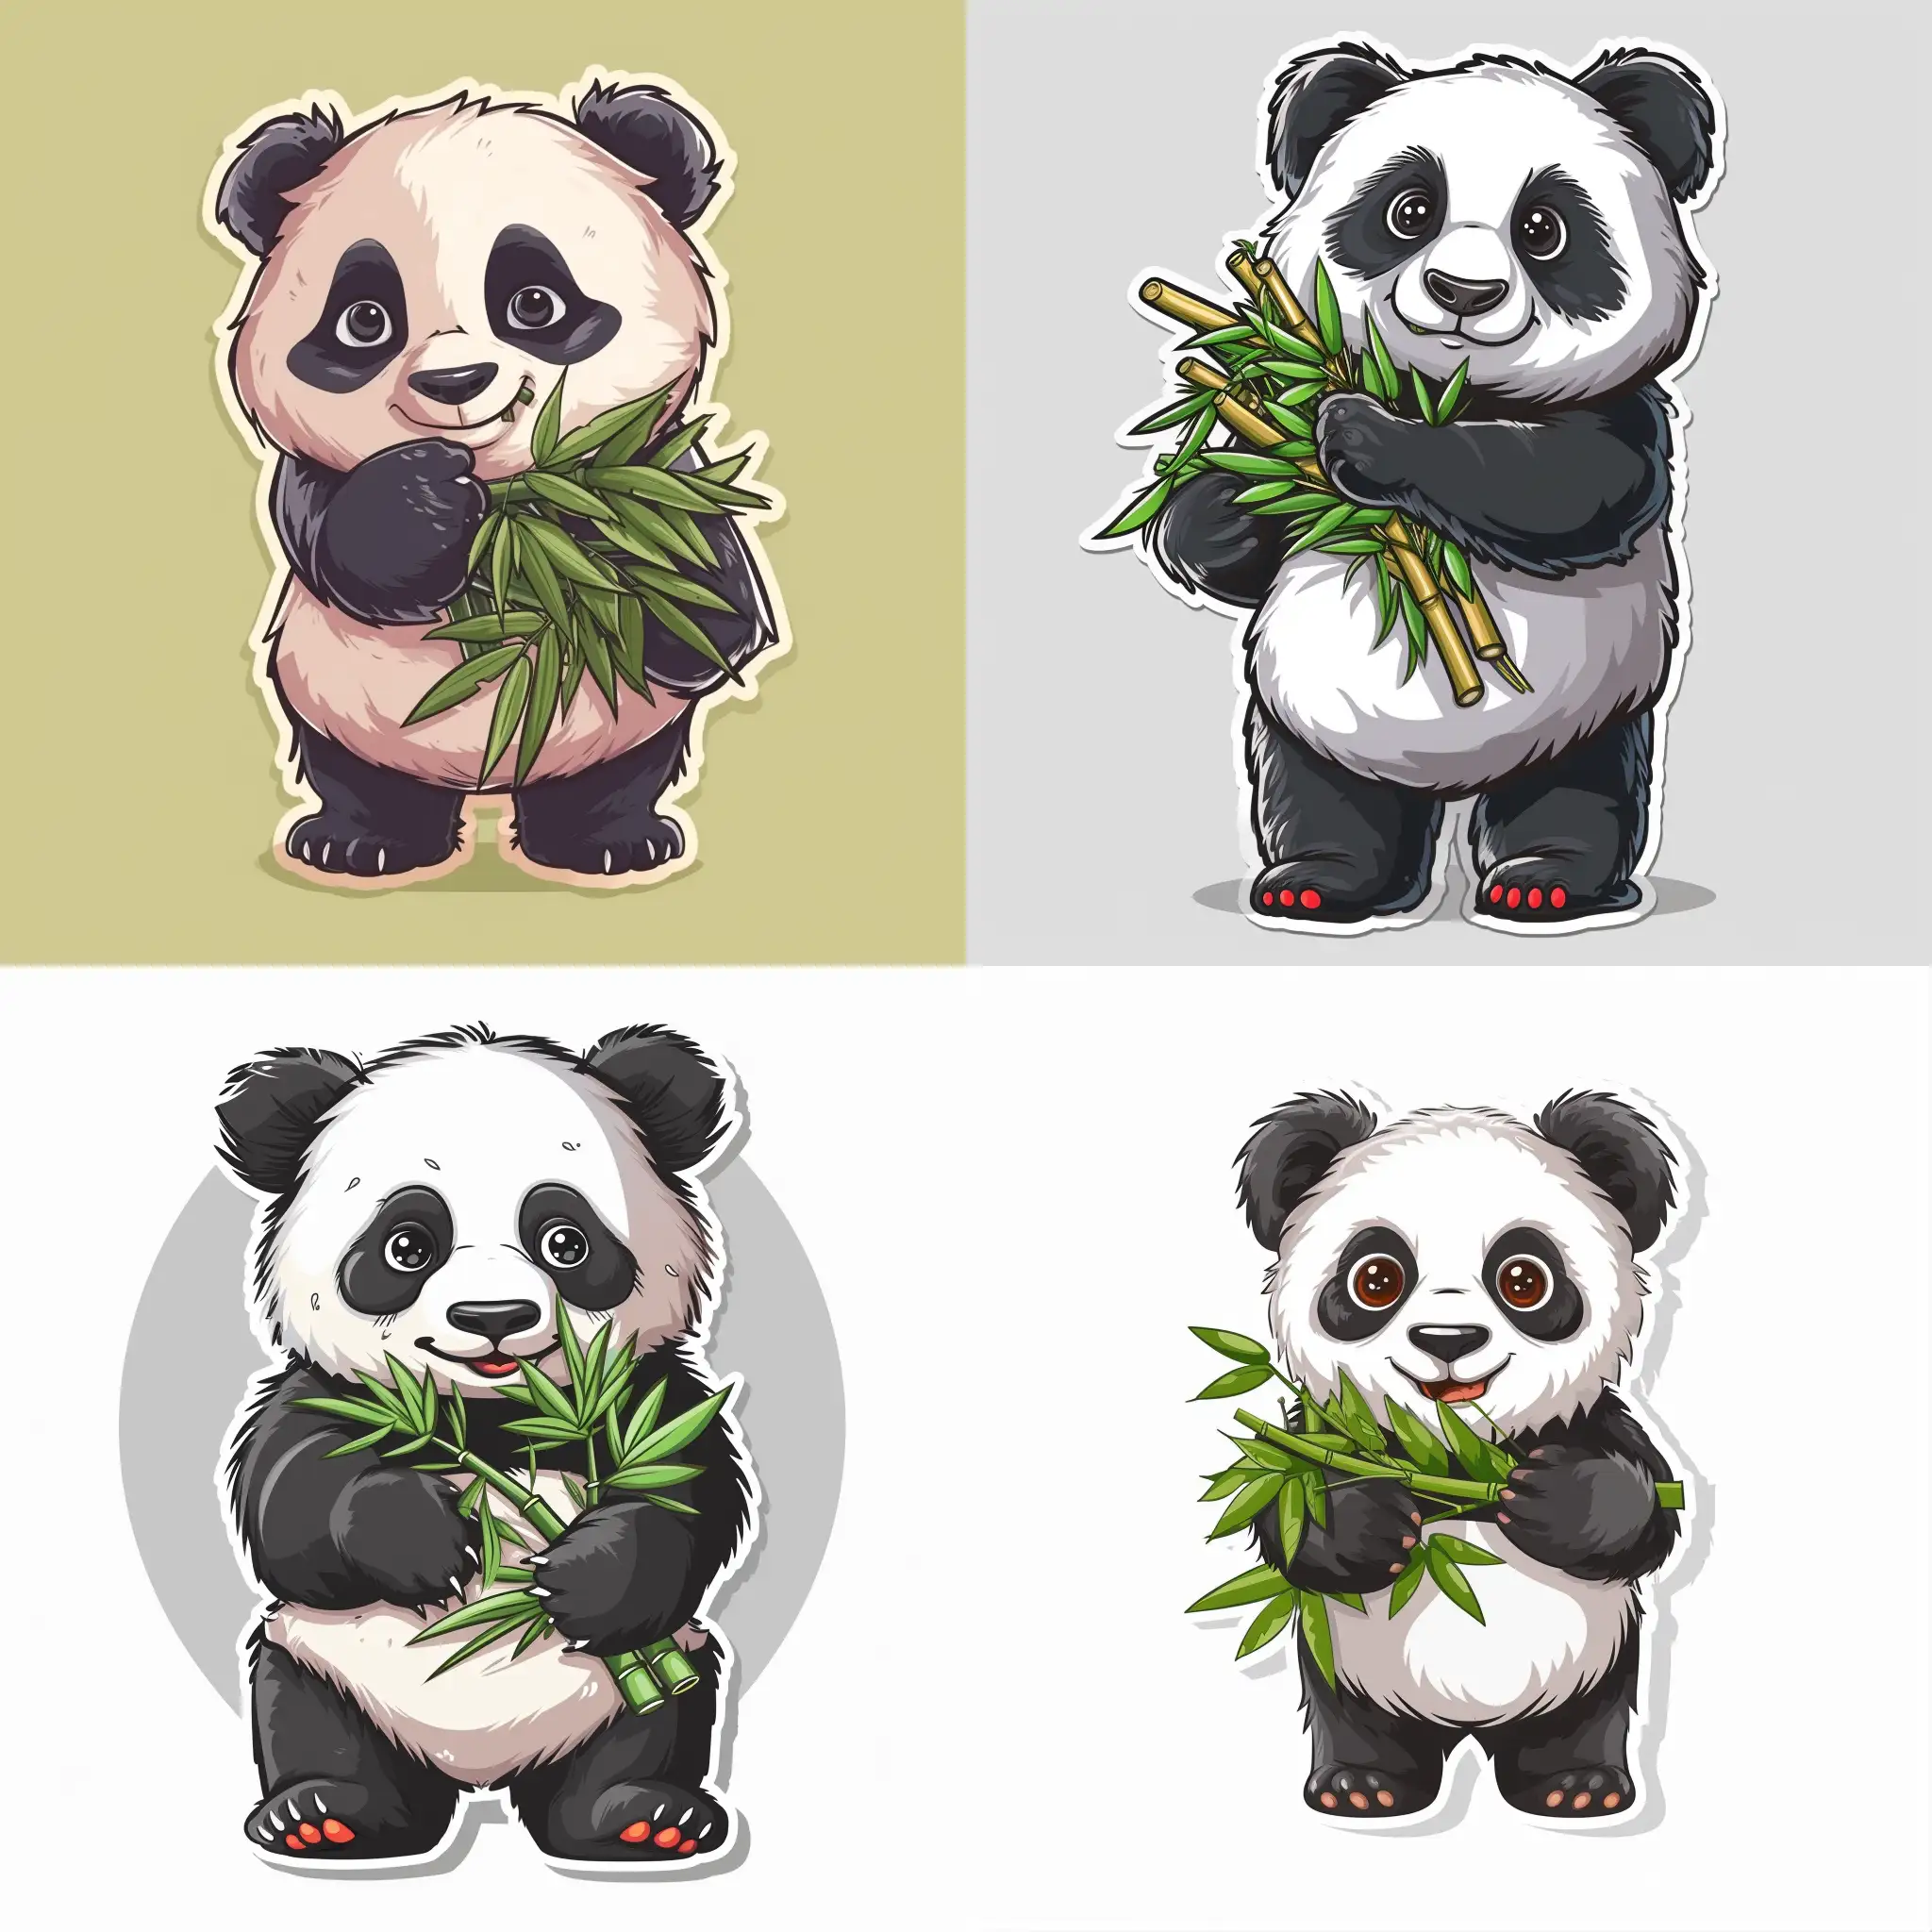 Cute little panda holds an armful of bamboo, cartoon sticker, in vector style